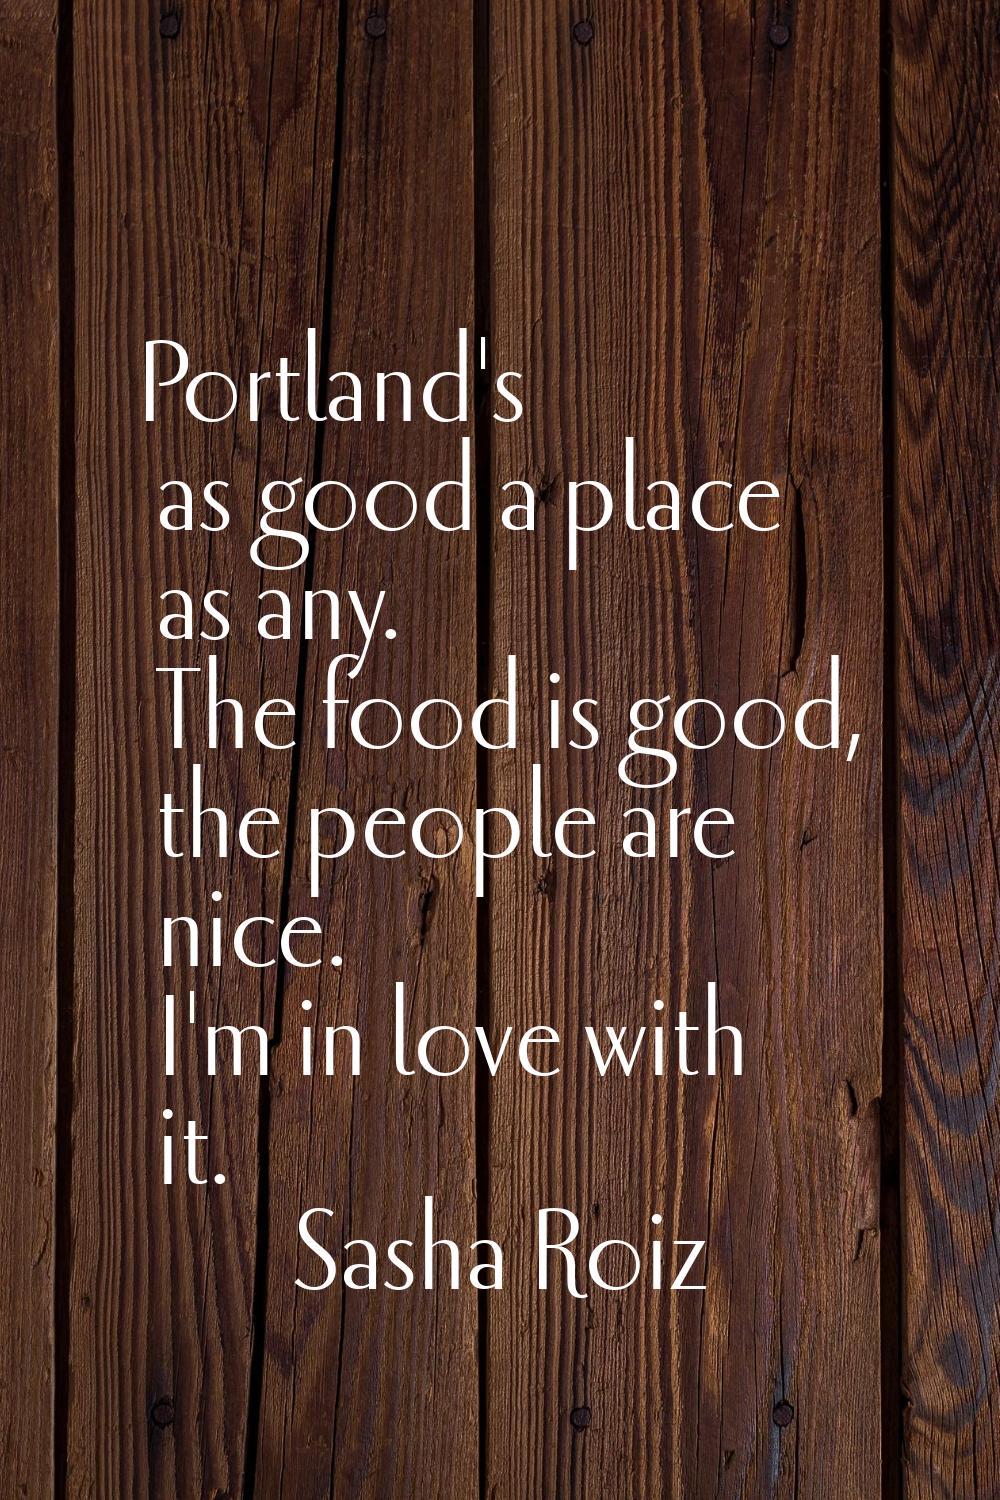 Portland's as good a place as any. The food is good, the people are nice. I'm in love with it.